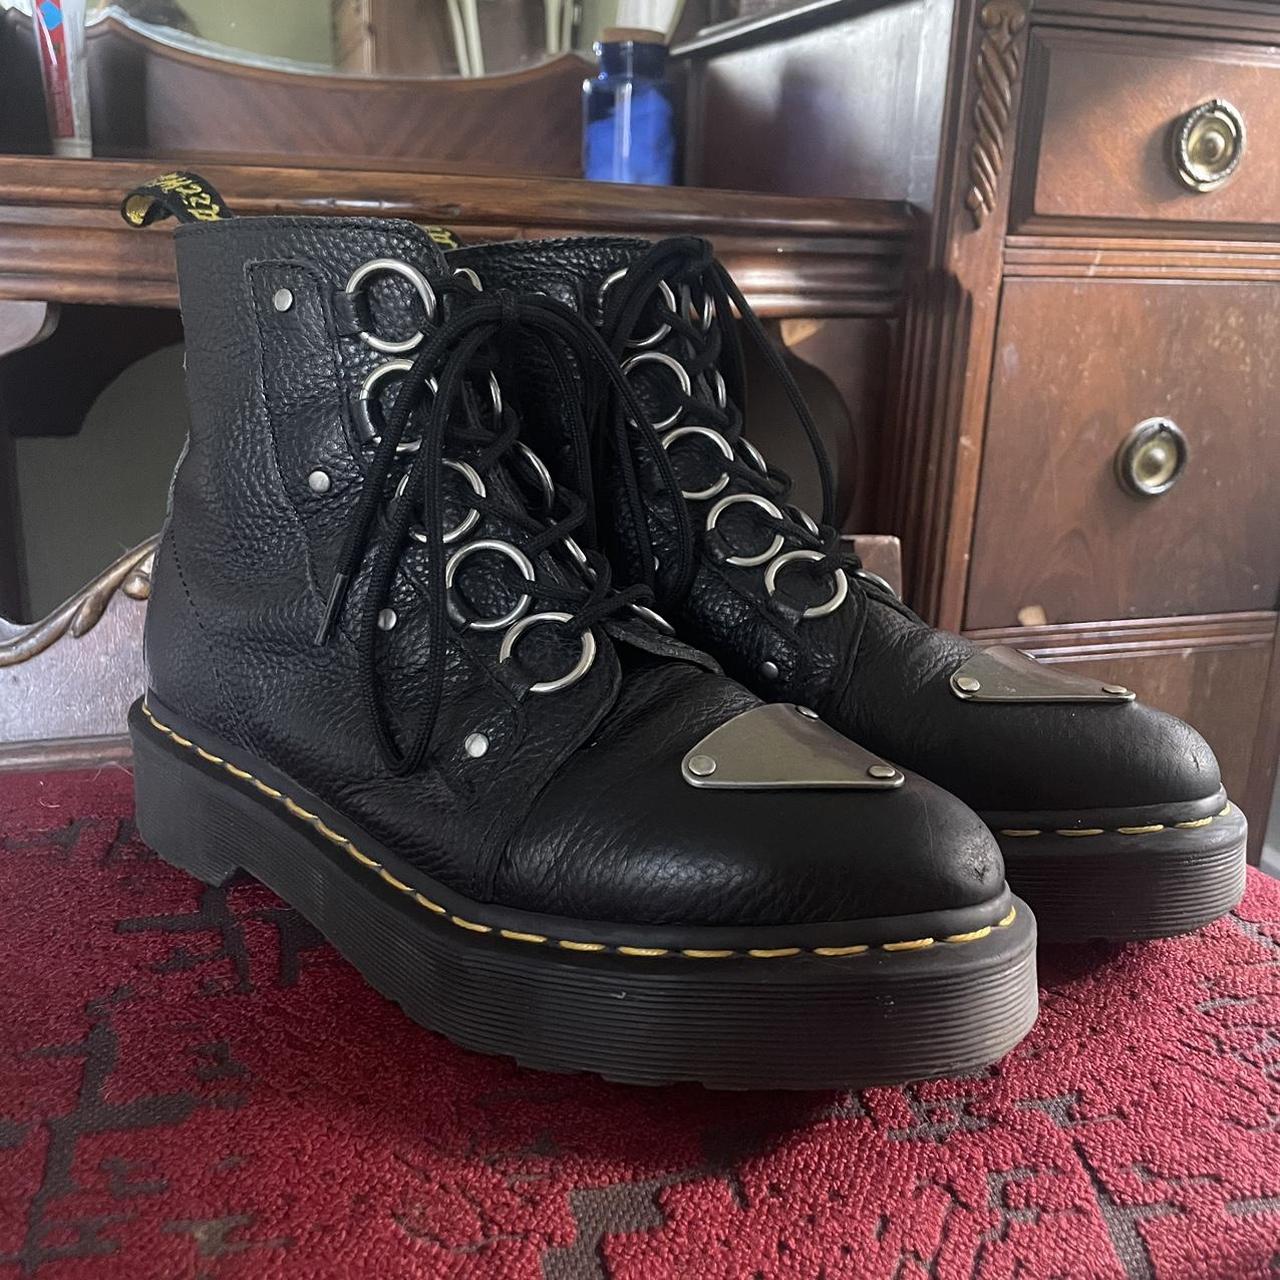 Dr. Martens Women's Black and Silver Boots | Depop